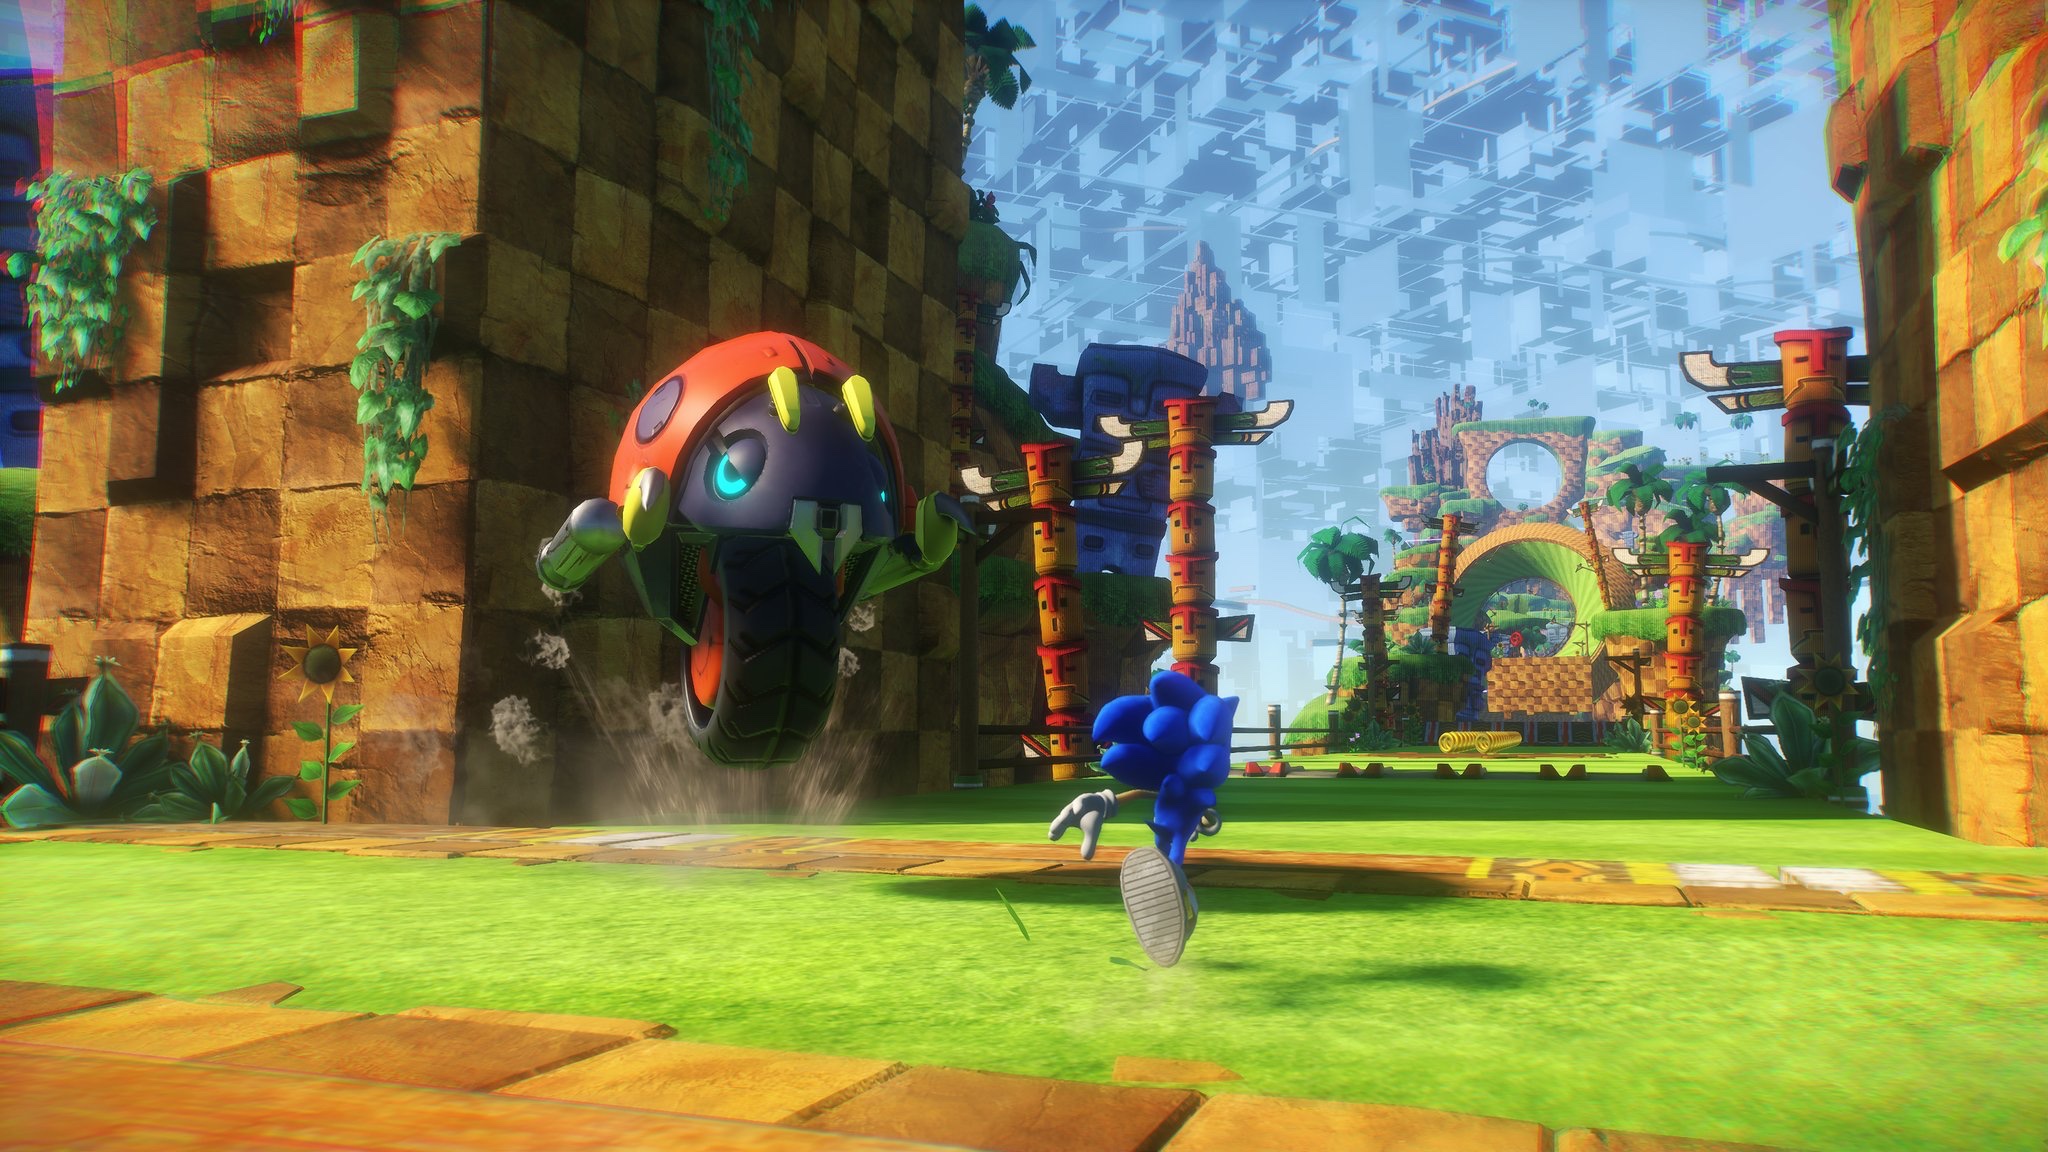 Sonic Frontiers MOBILE Game Coming & Public DEMO In September 